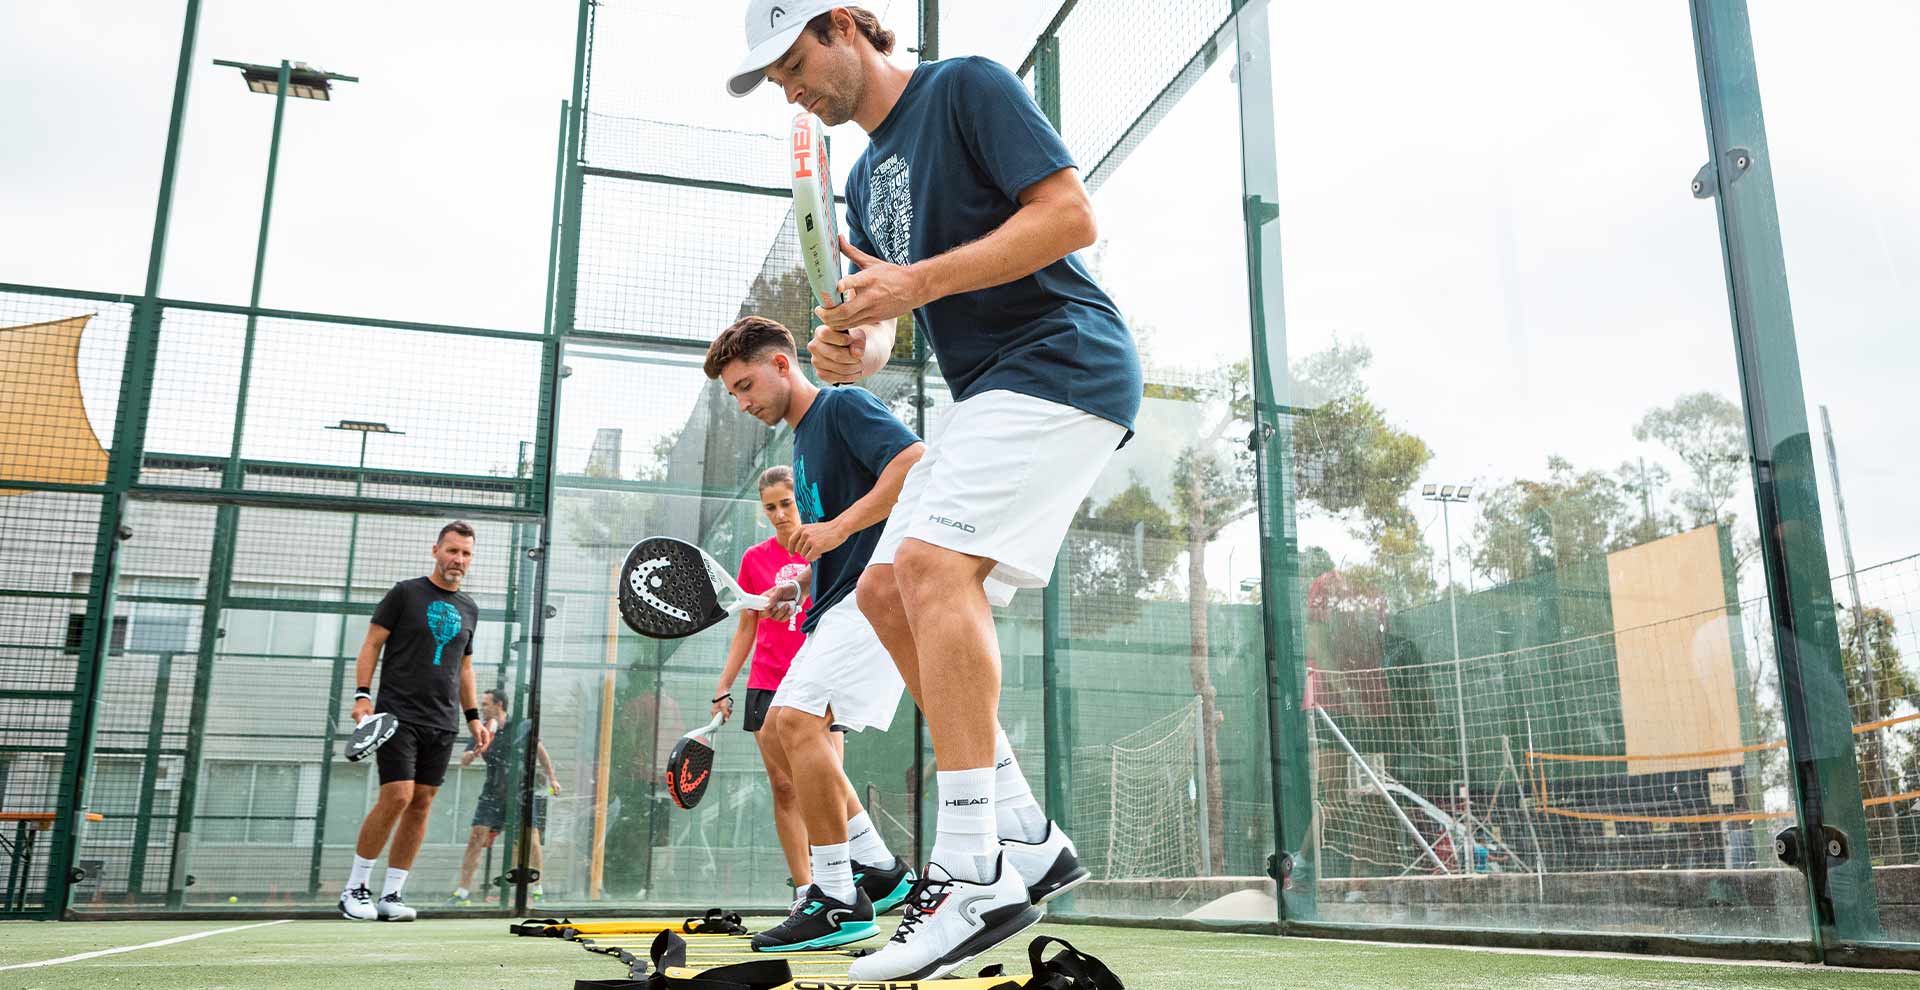 5 tips to improve your padel game